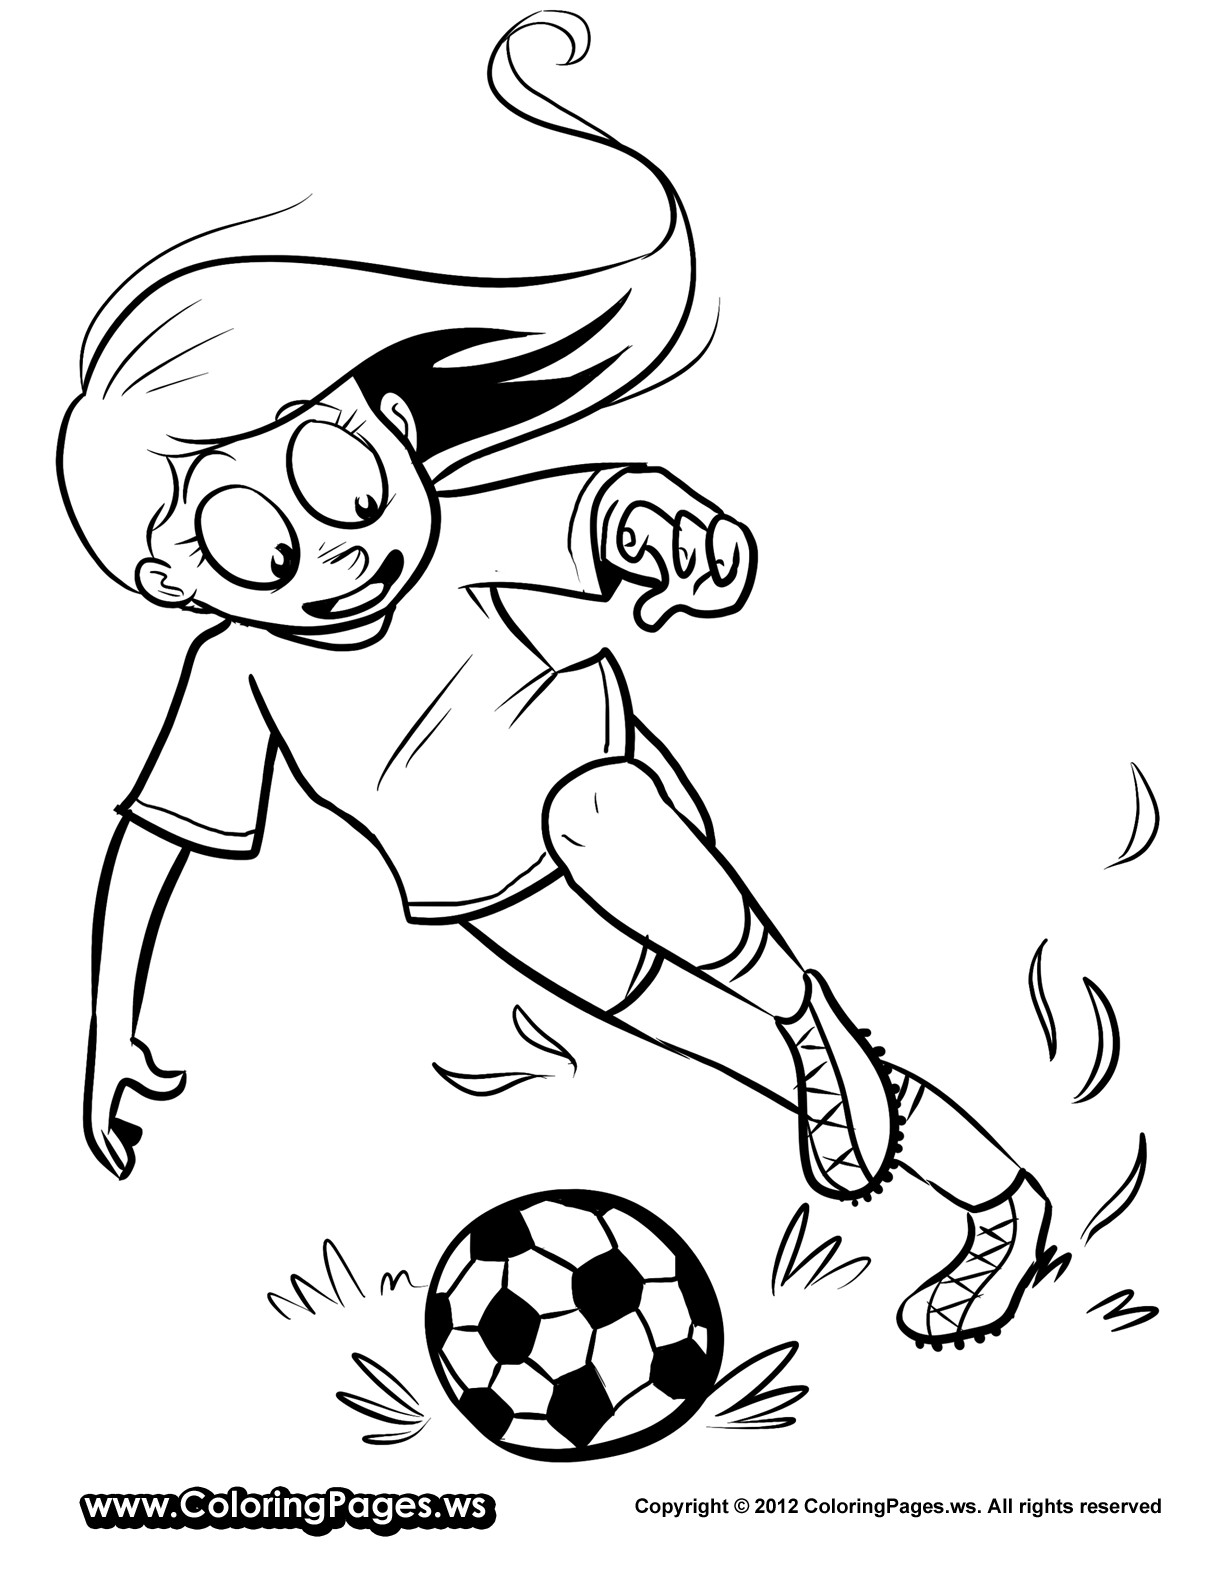 Girls Sports Coloring Pages
 Soccer Player Coloring Pages Soccer Player